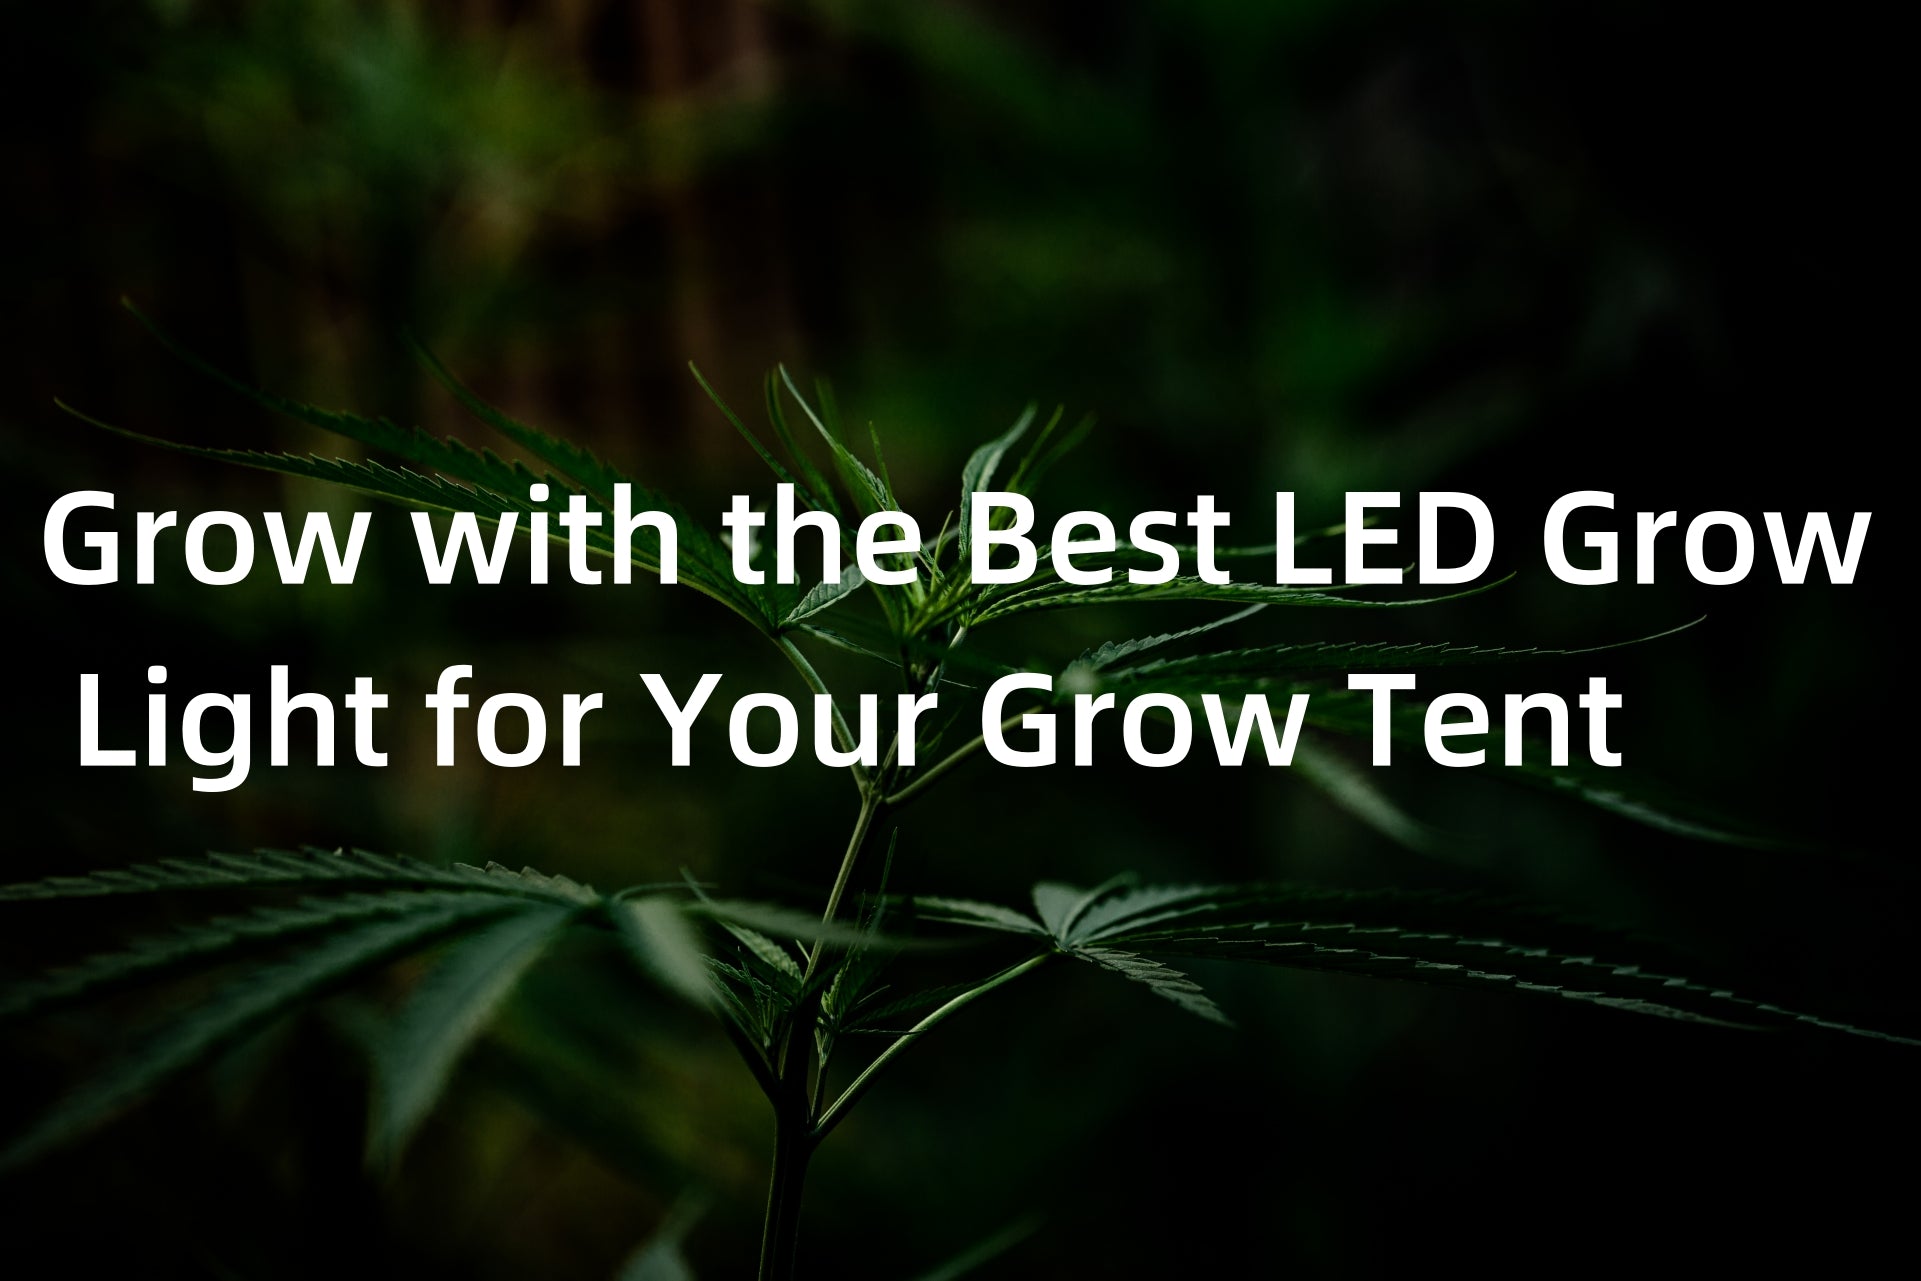 Grow with the Best LED Grow Light for Your Grow Tent